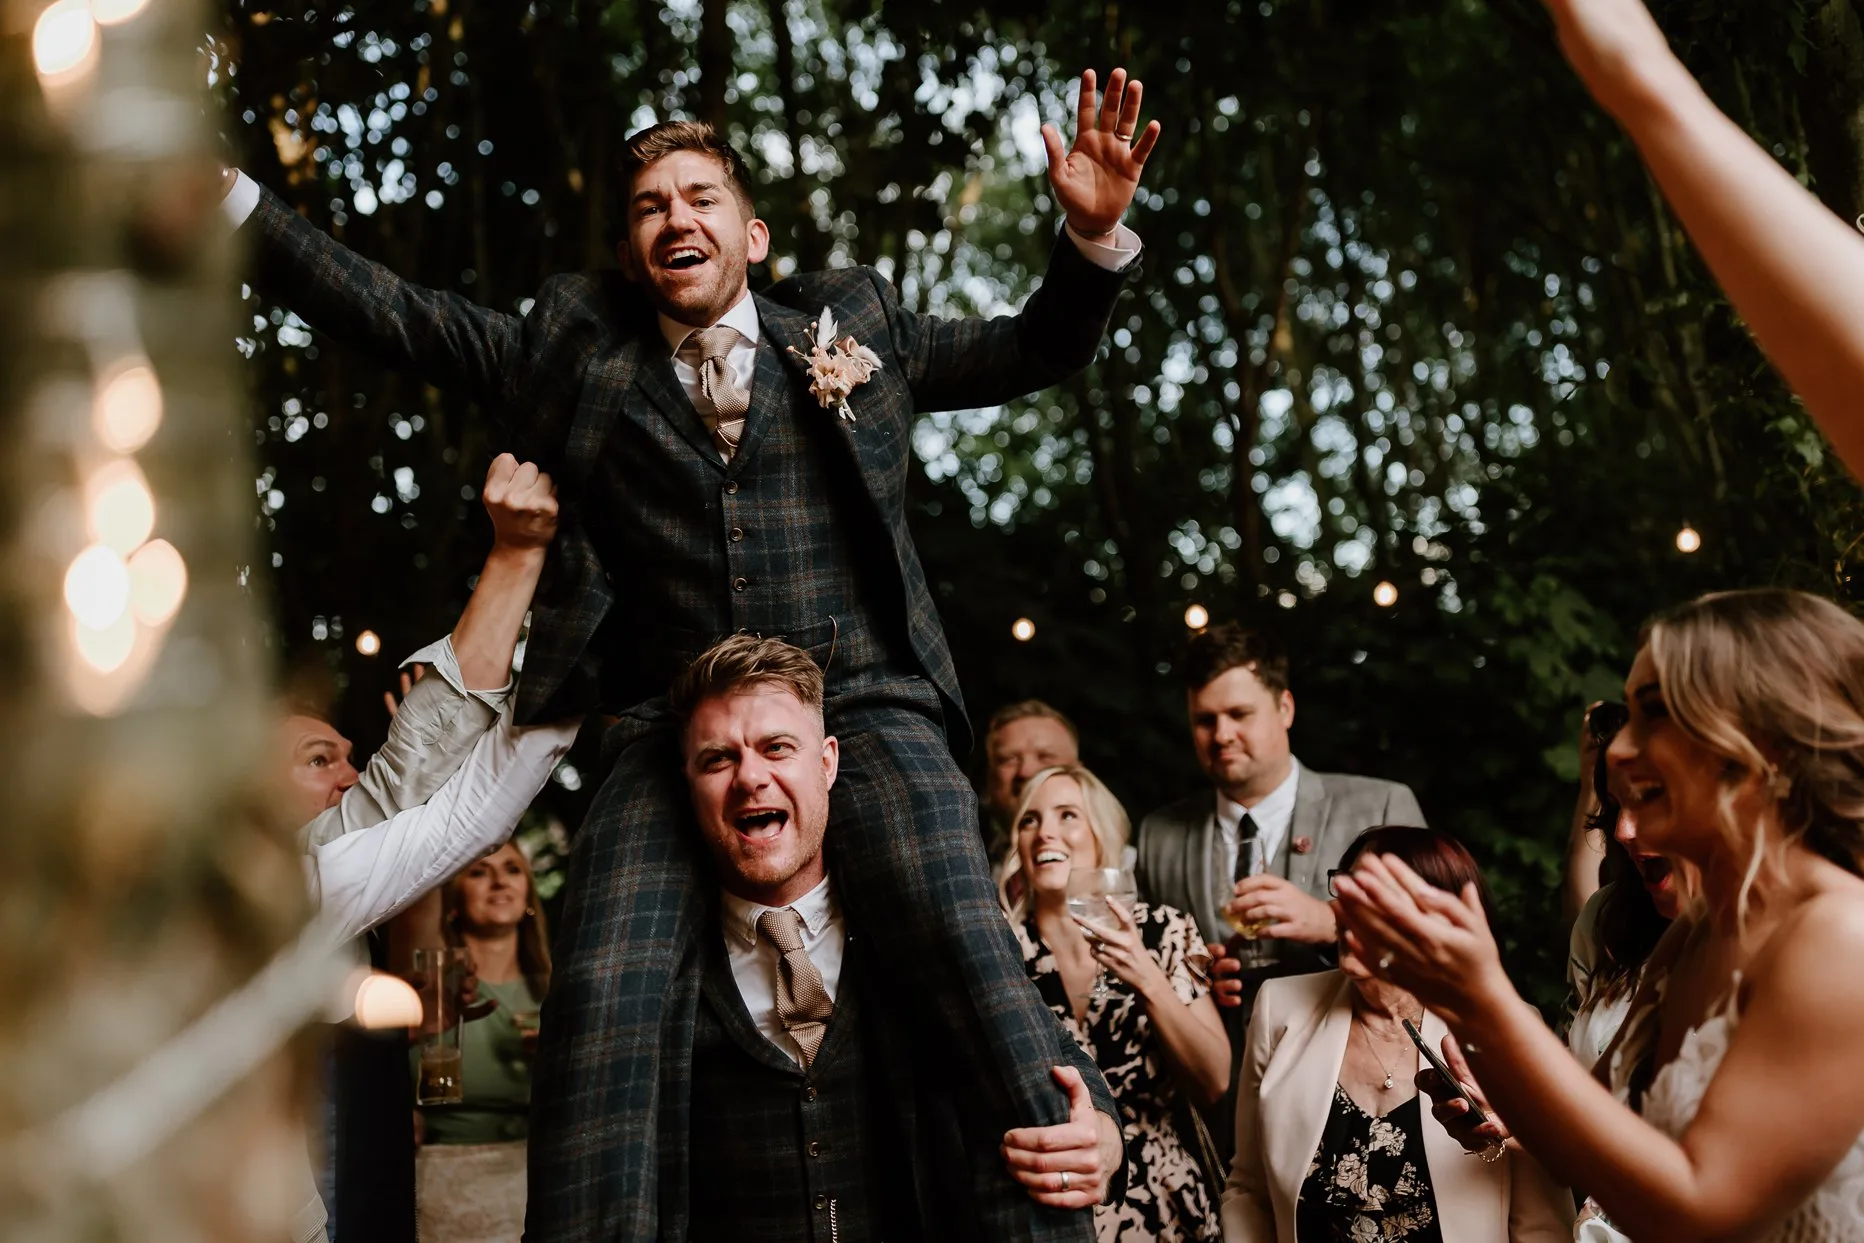 Groom on top of a groomsman shoulders dancing in the woods at Oaklands Grand Lodge wedding venue in Driffield. Wedding guests surround them clapping and smiling.